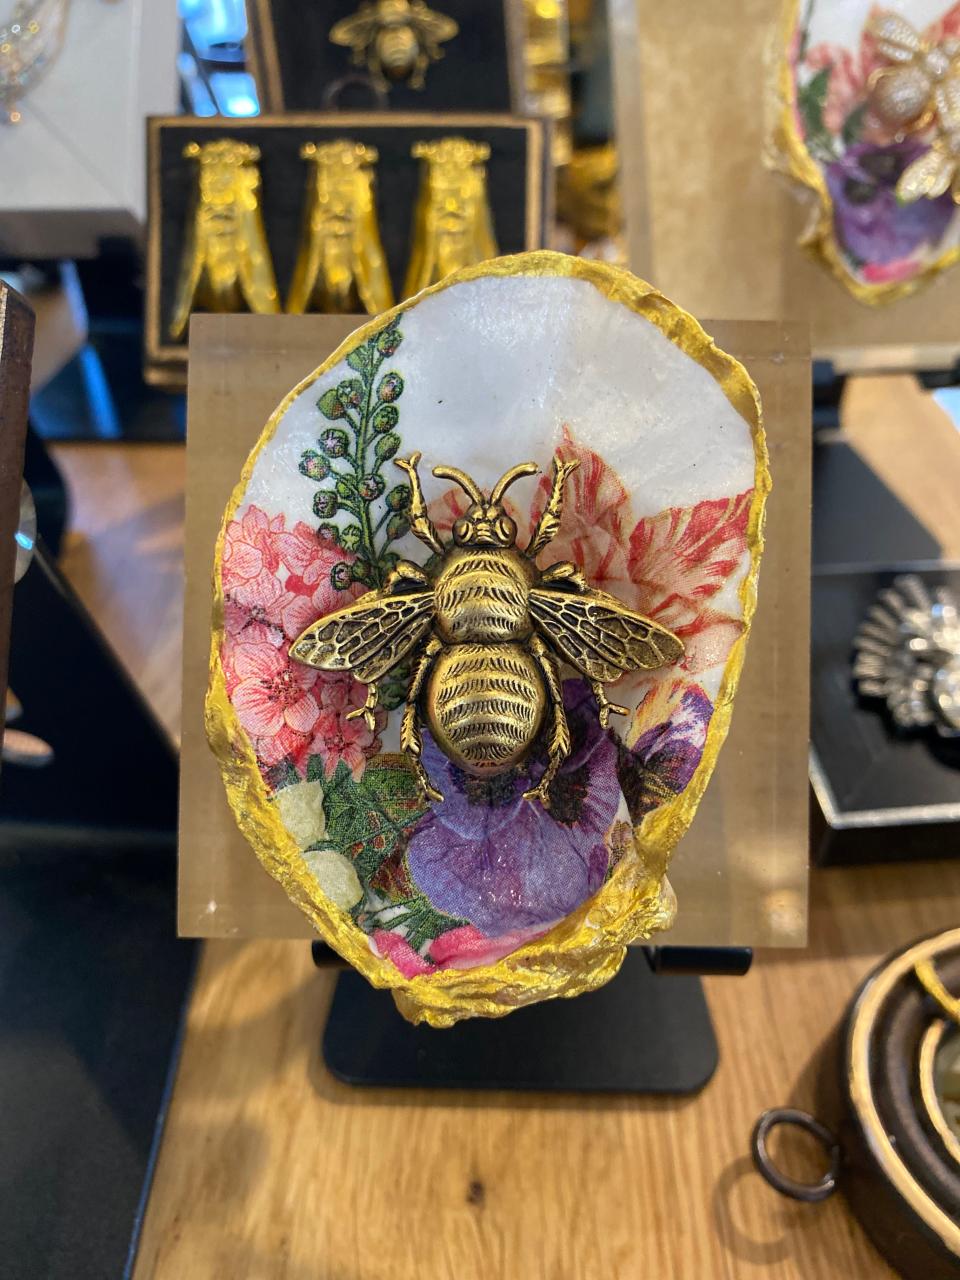 Museum Bees,12404 Ridge Road, Anchorage, KY. Handmade art from decorative objects and oyster shells. $65